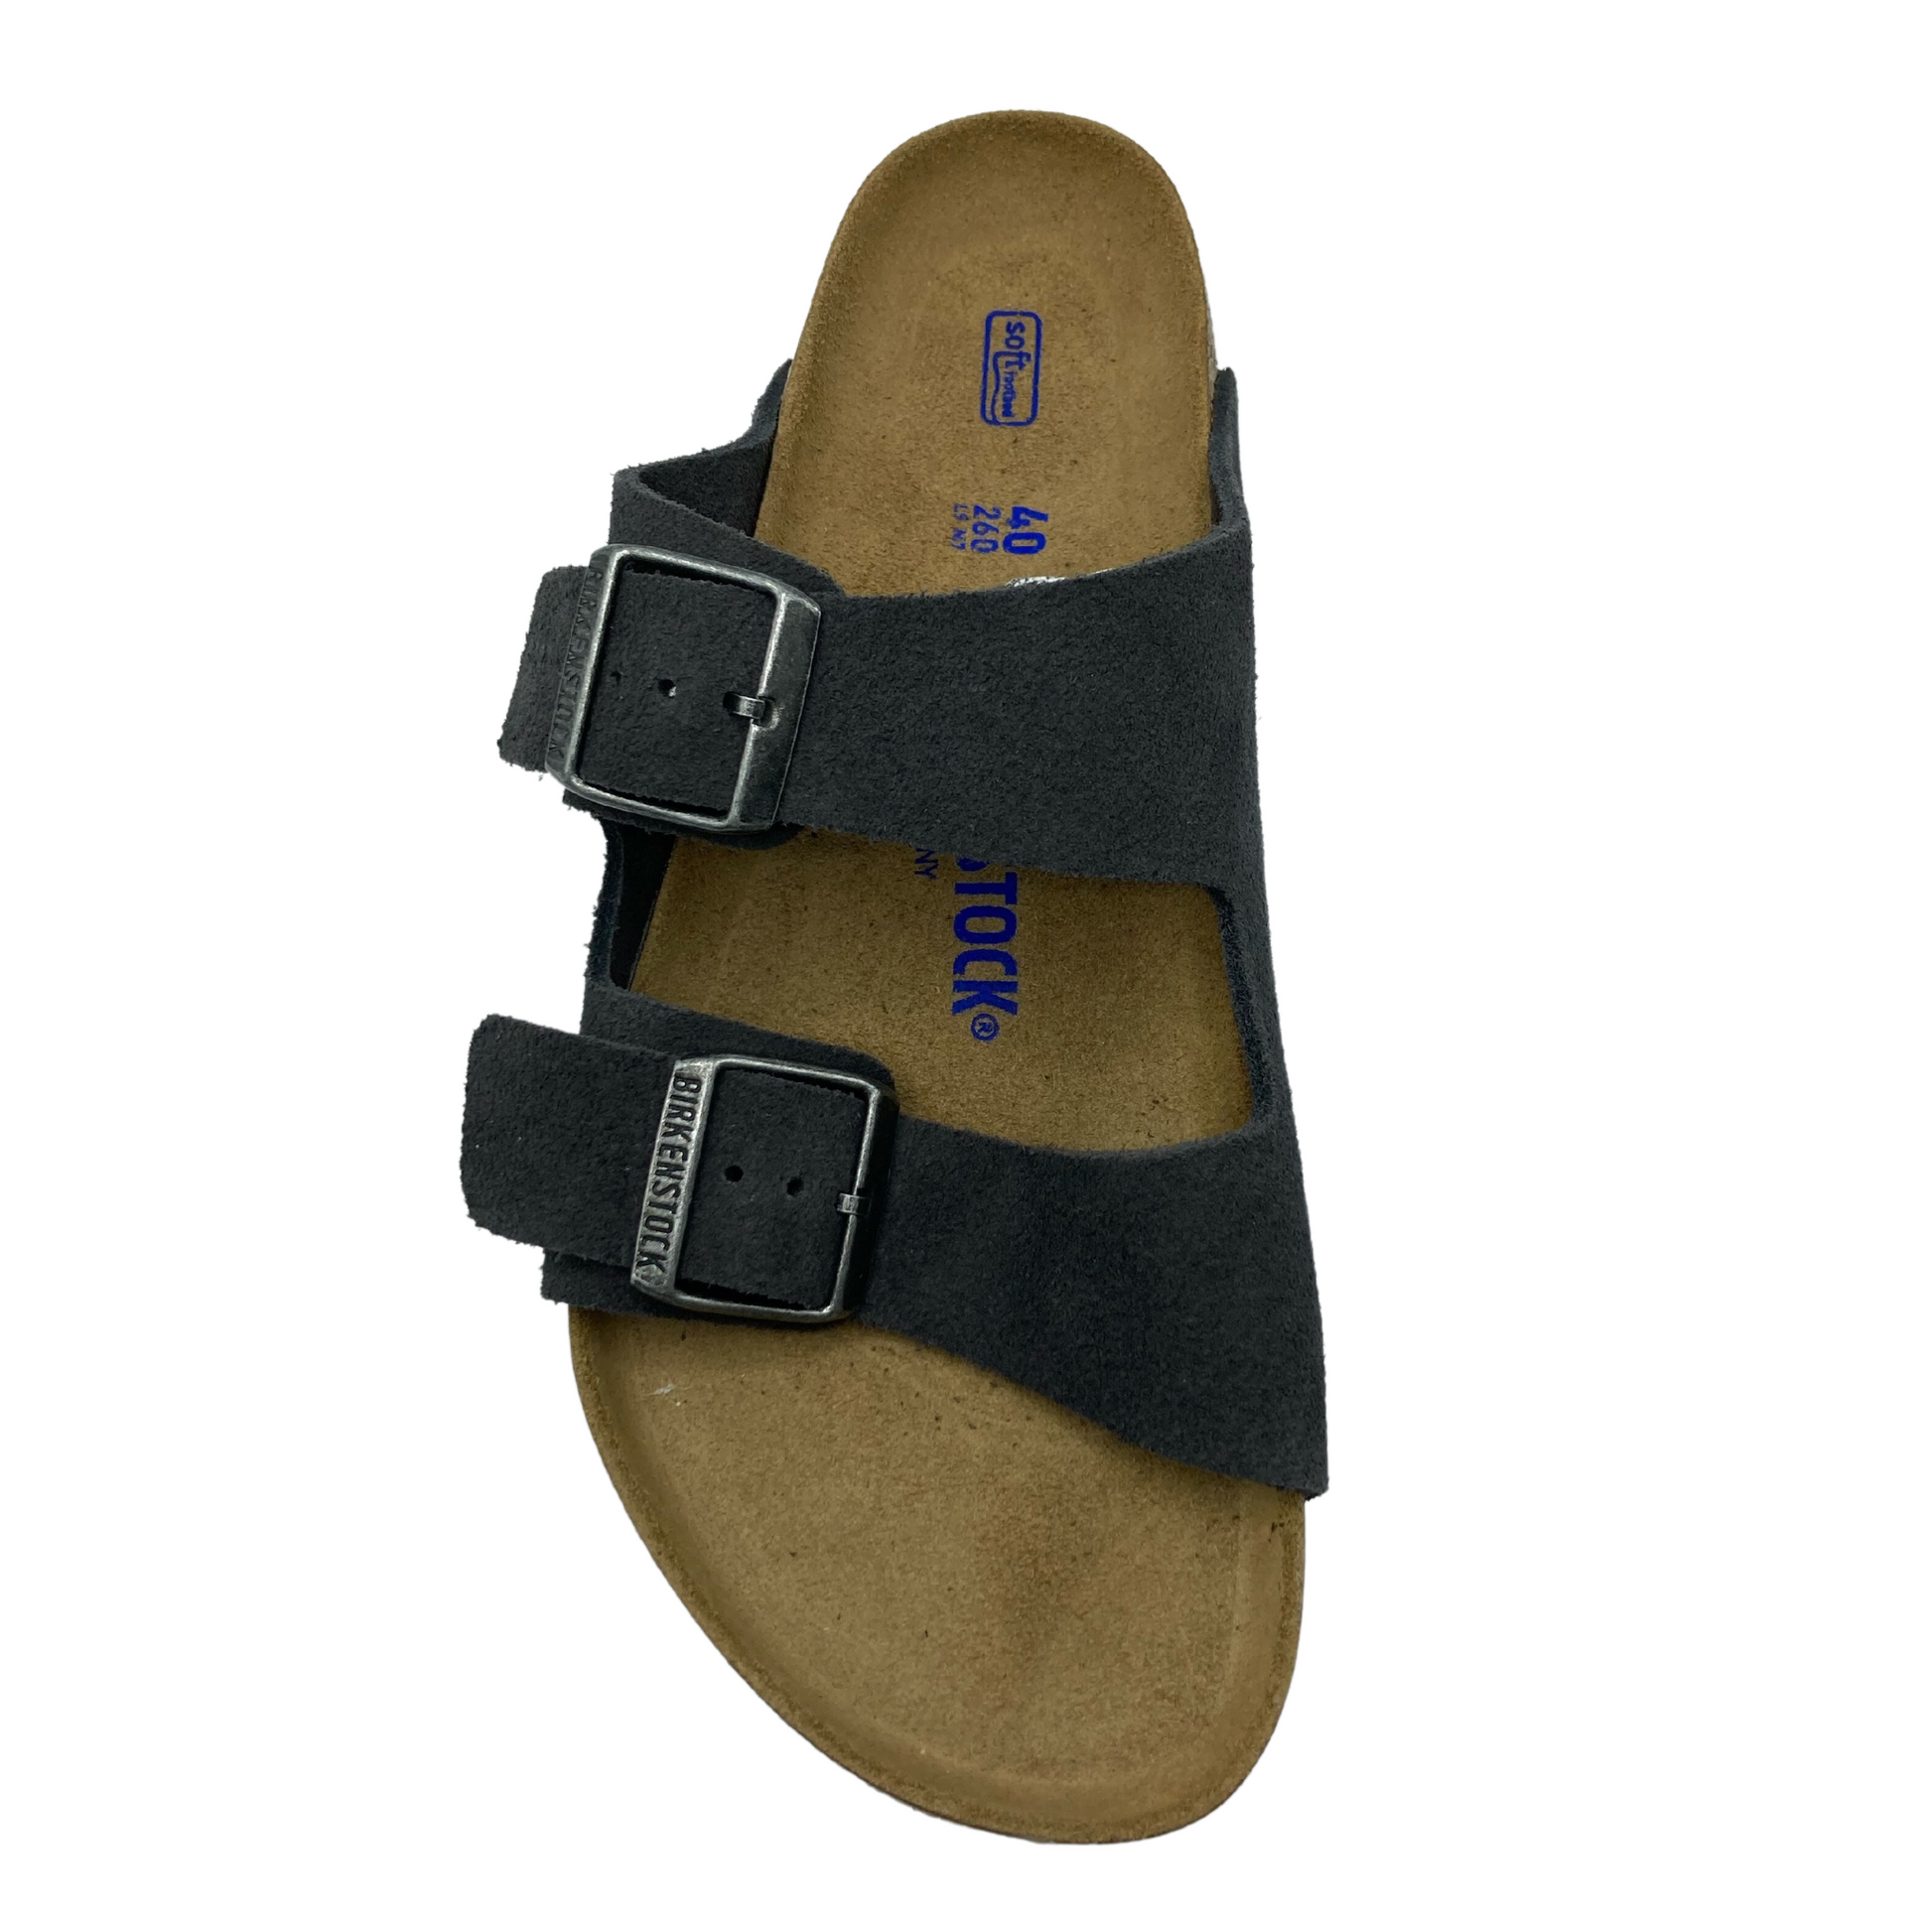 Top view of sandal with dark grey upper straps and brown footbed